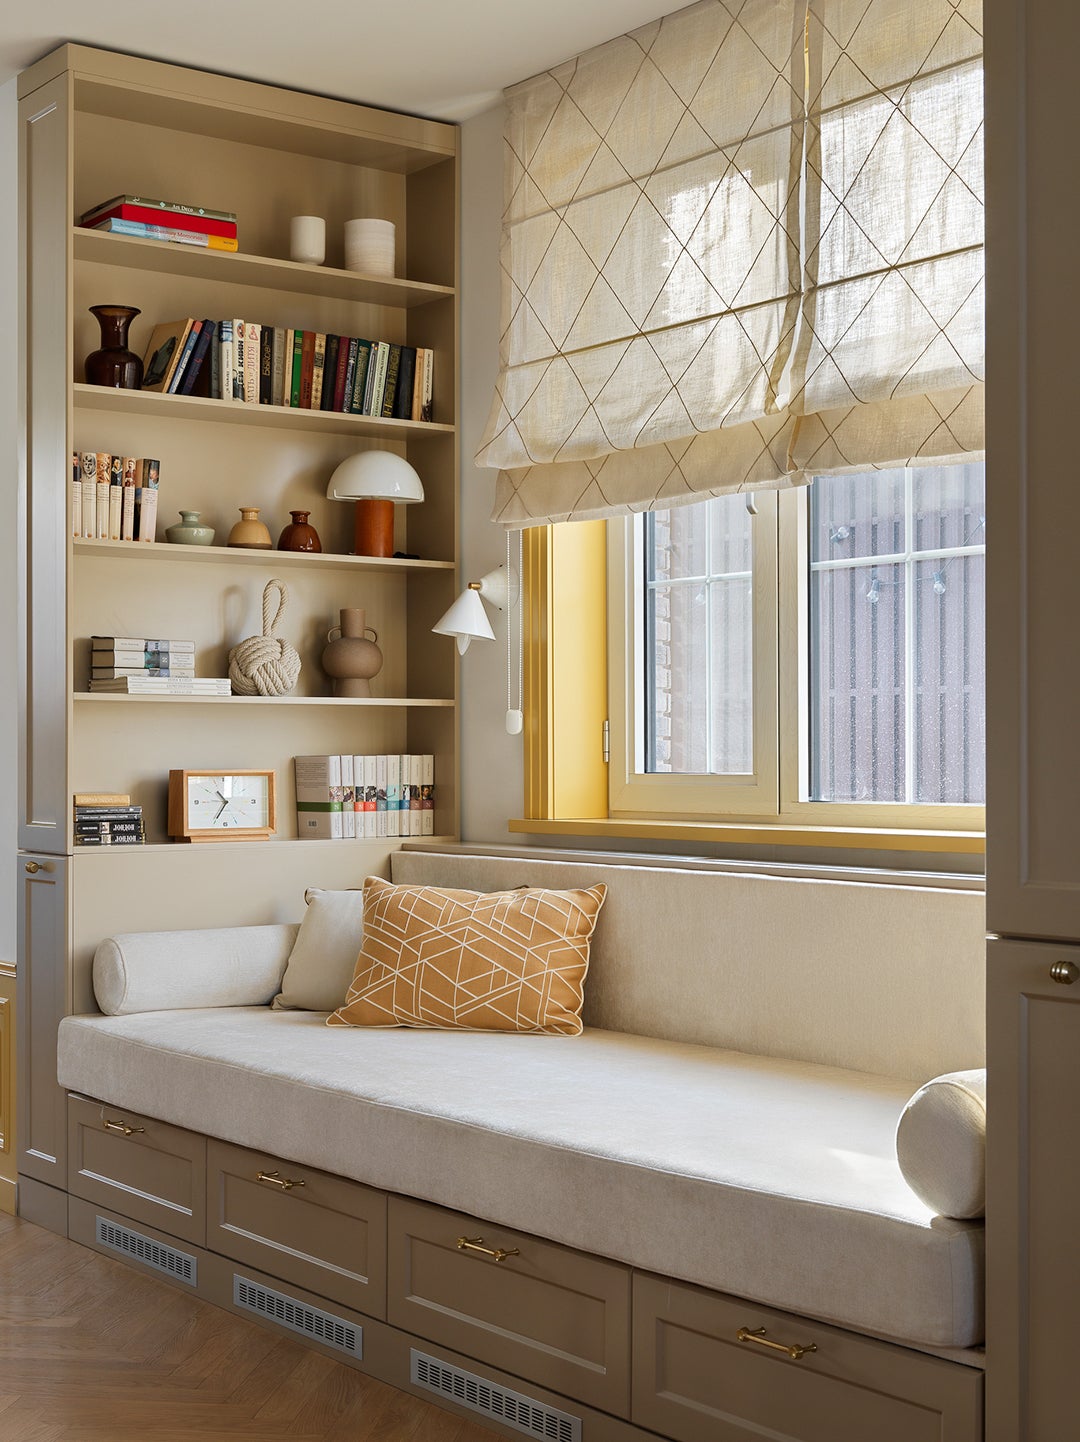 bench nook surrounded by shelves